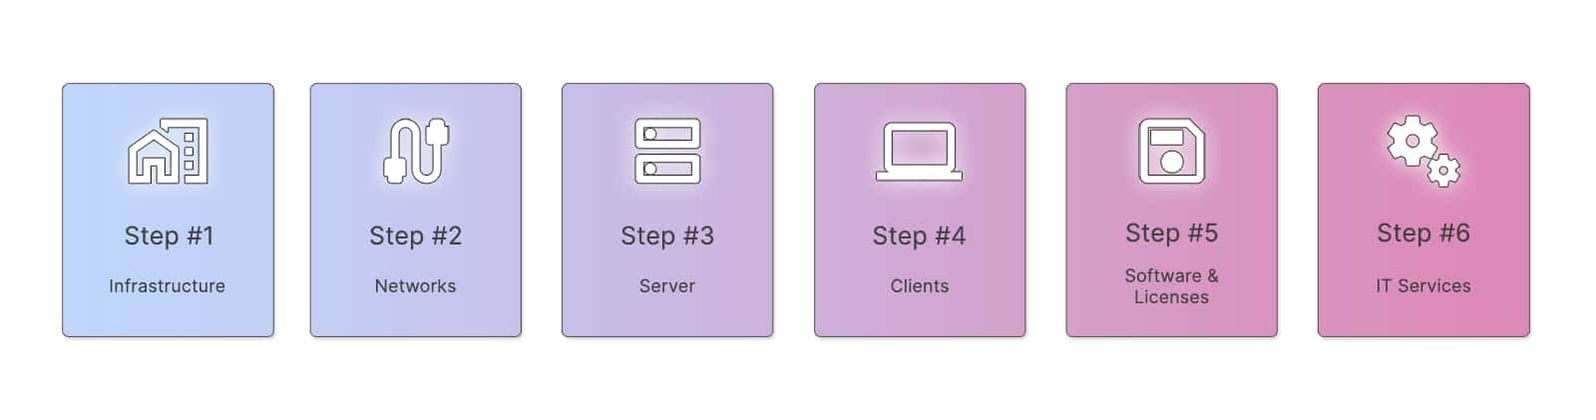 The 6 steps to IT documentation - IT asset management